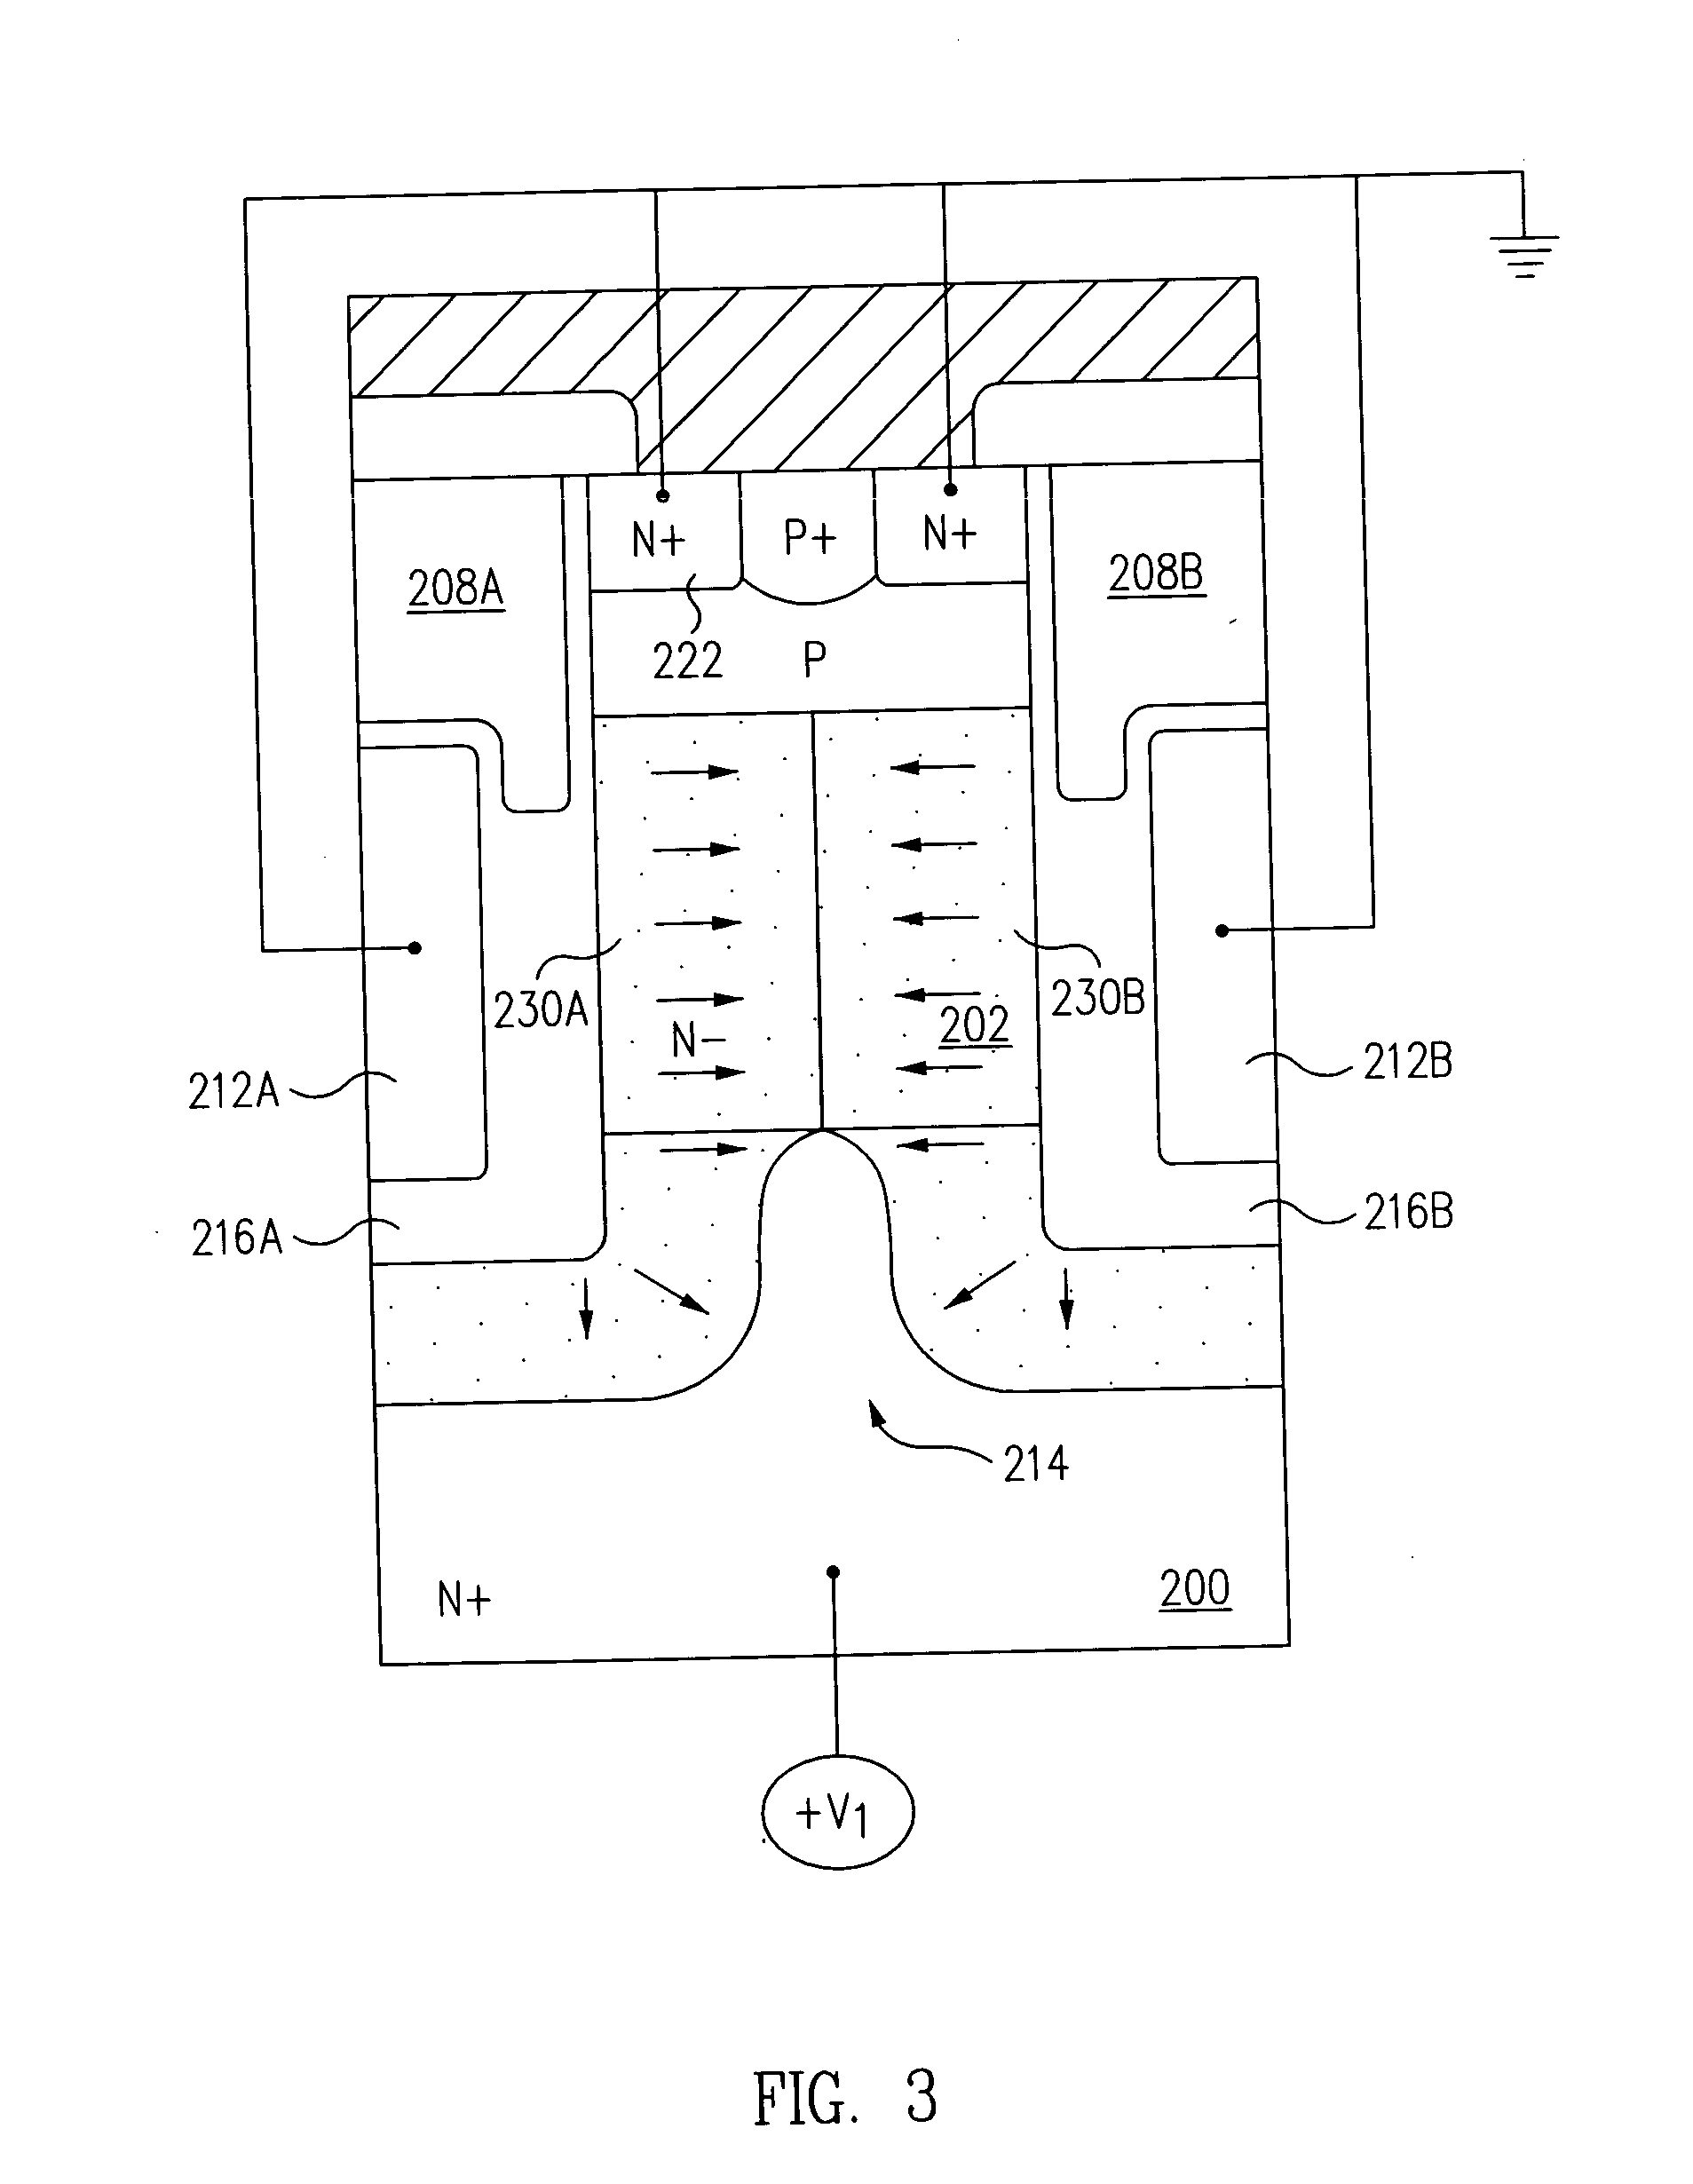 Super trench MOSFET including buried source electrode and method of fabricating the same